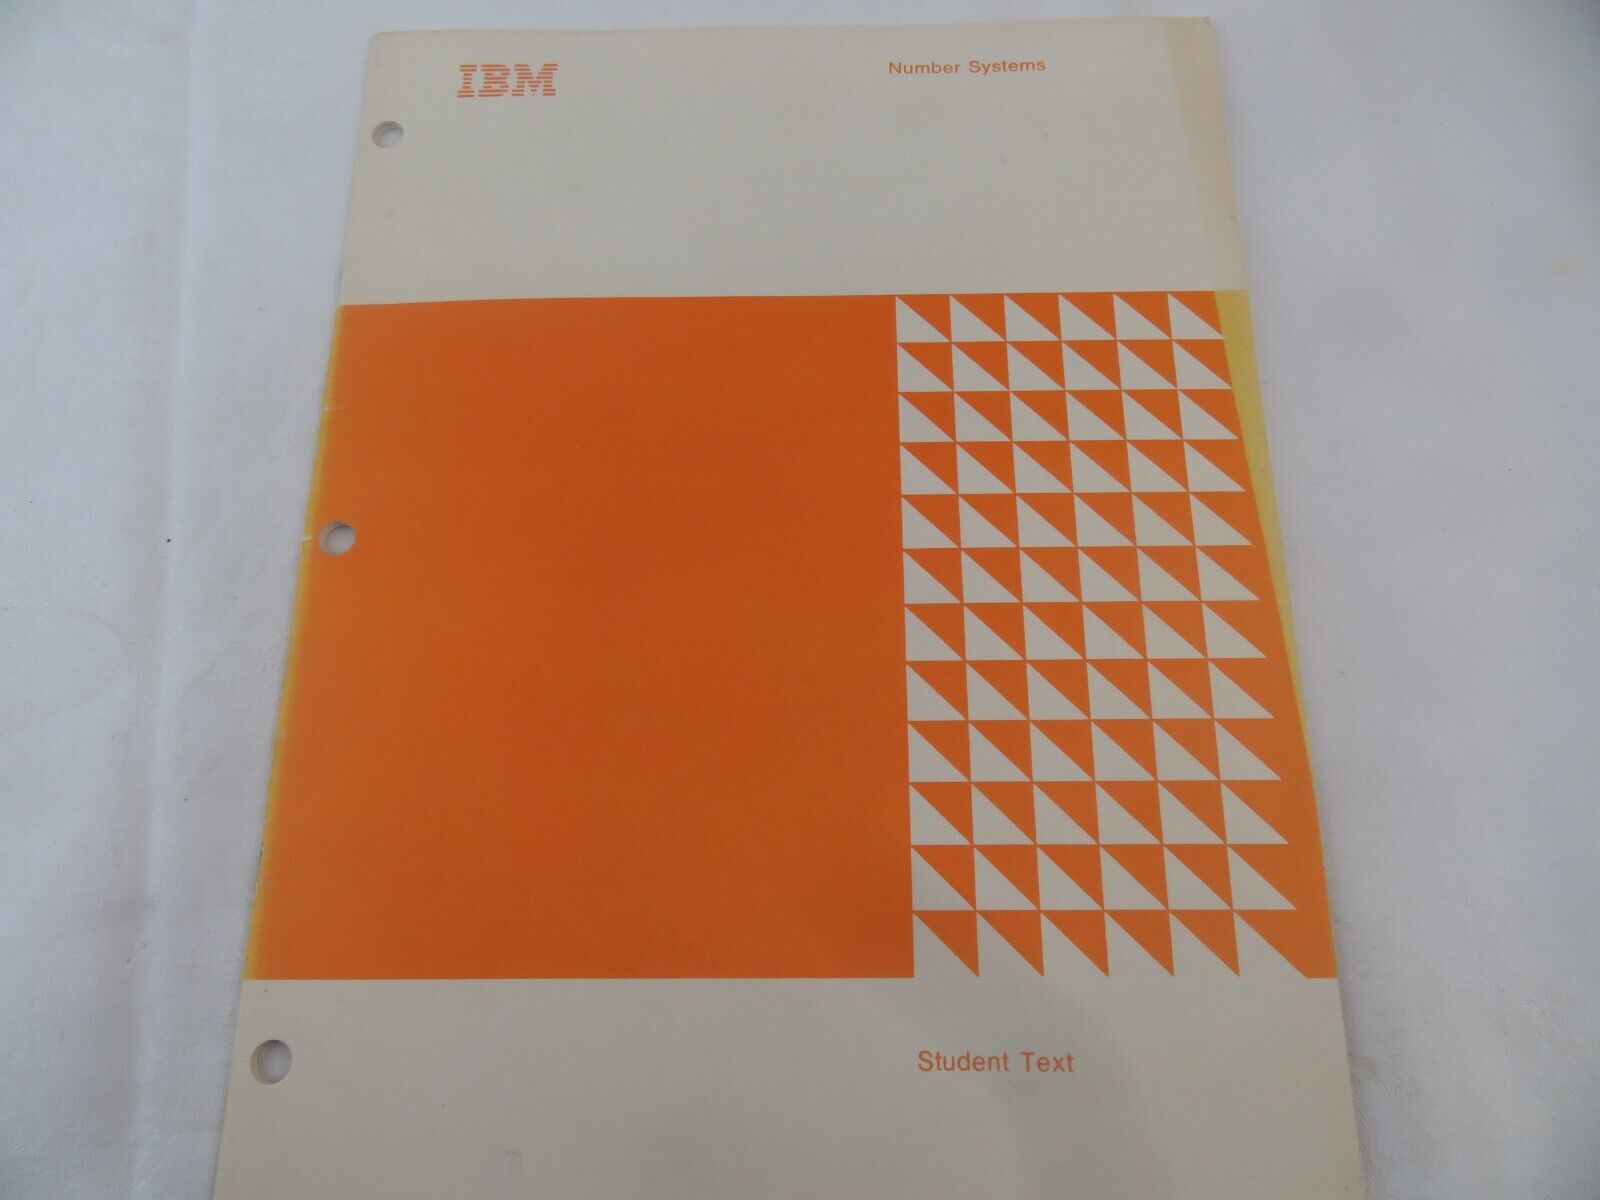 Vintage IBM Number Systems Student Text Manual 1970